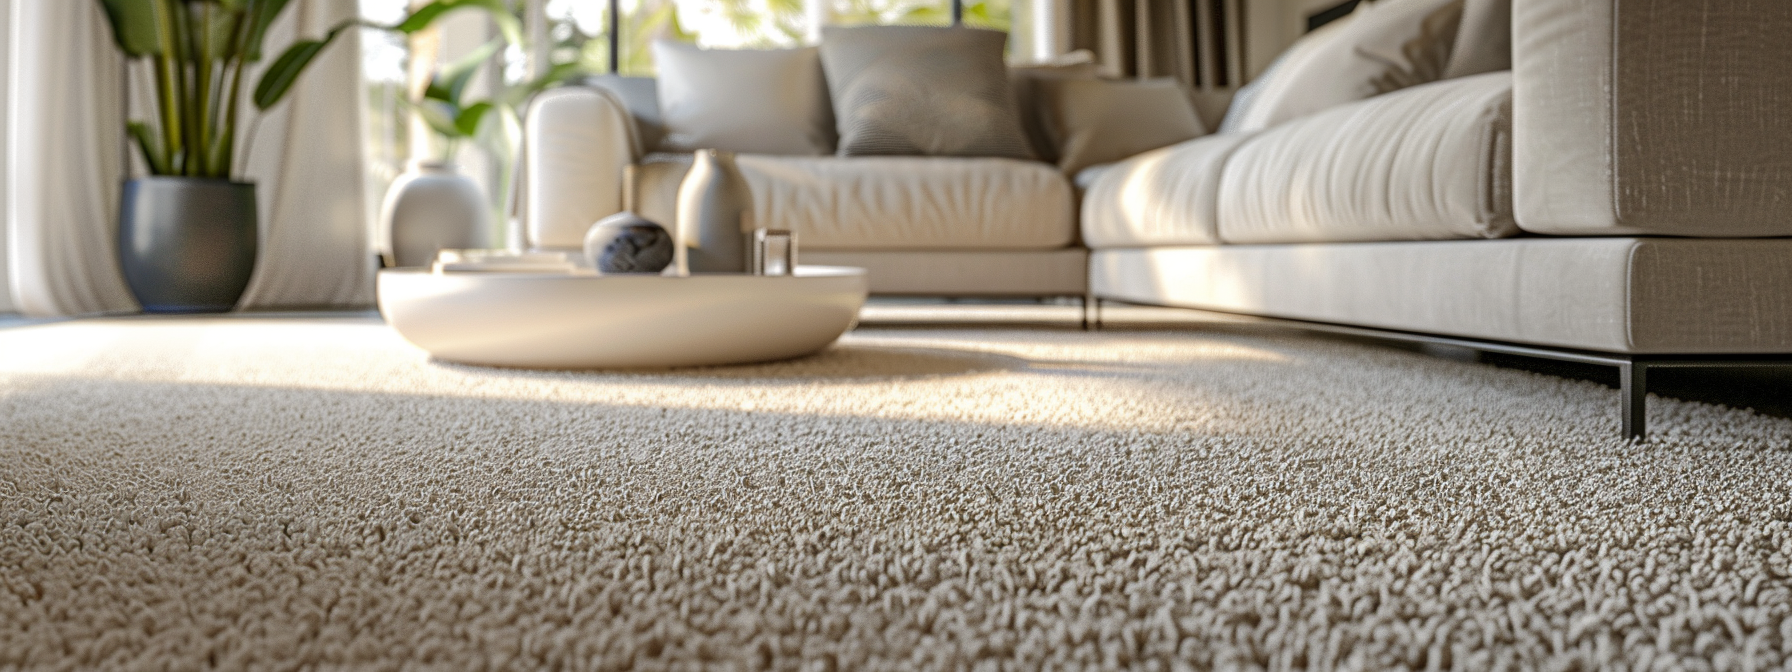 Immediate Action: A Spot Cleaning Guide for Common Carpet Stains and Spills